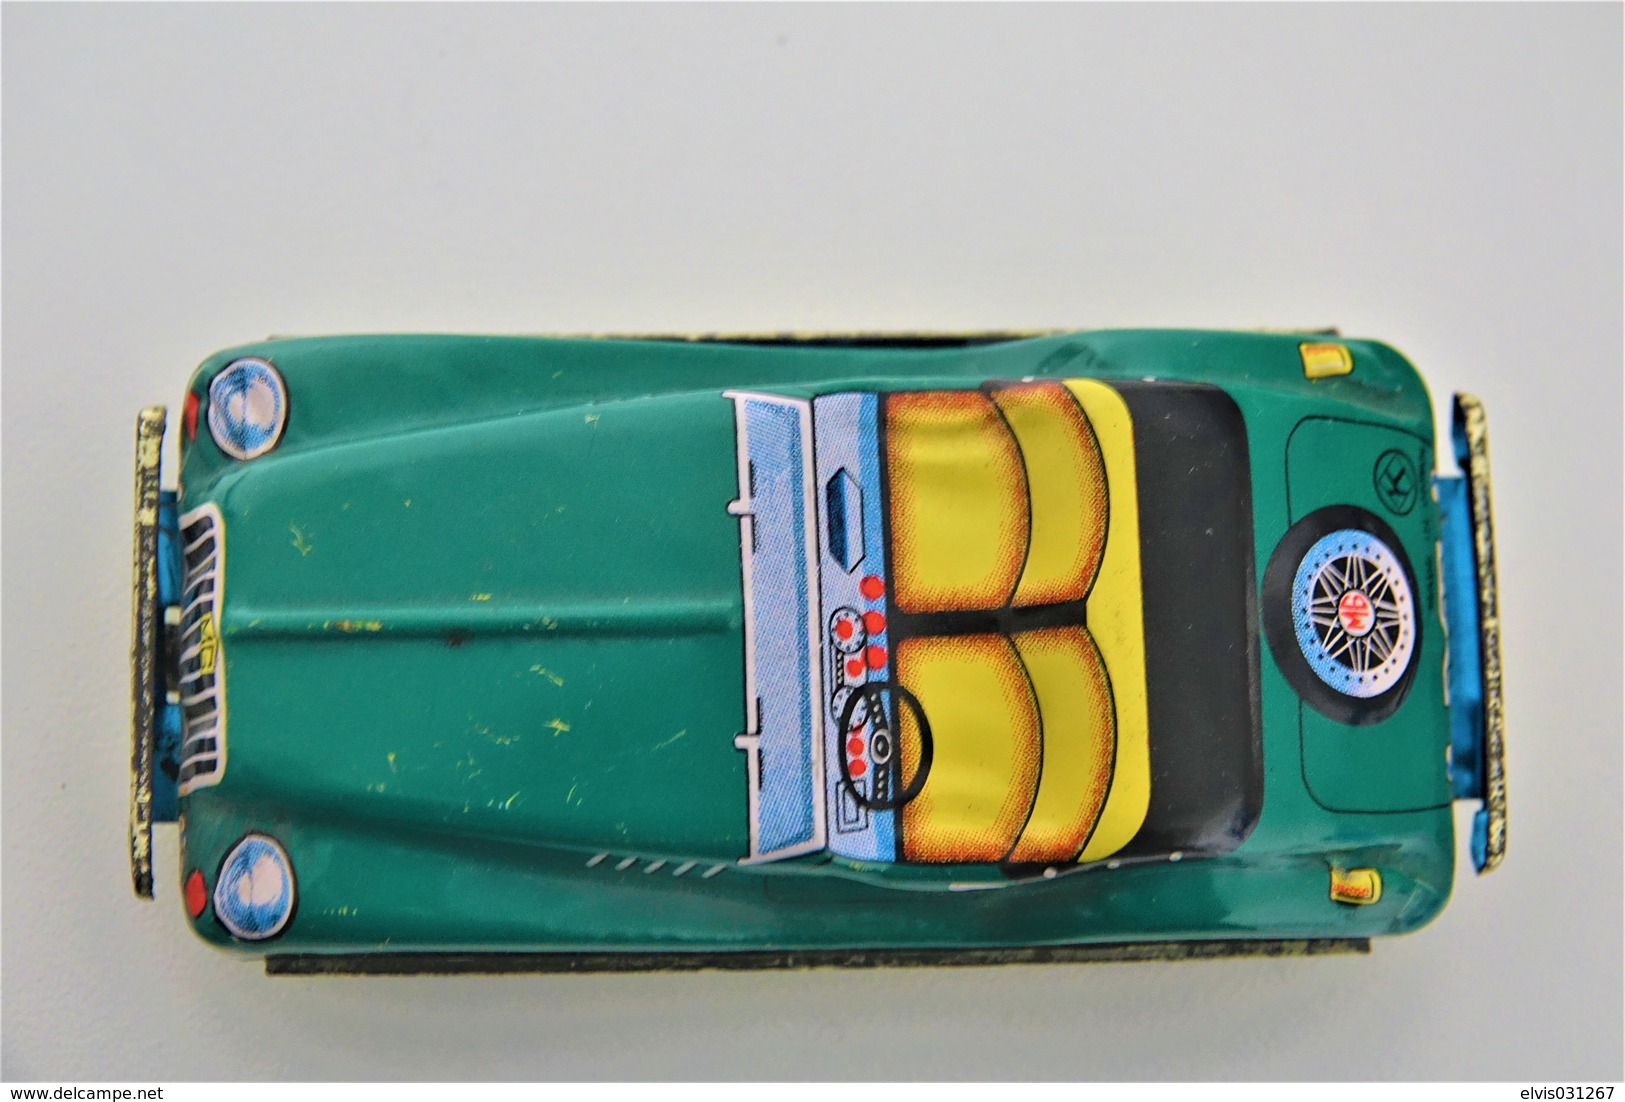 Vintage TIN TOY CAR : Maker LUCKY TOY Kashiwai - Green MG - Morris Garages - 10.5cm - JAPAN - 1960 - Friction - Collectors & Unusuals - All Brands